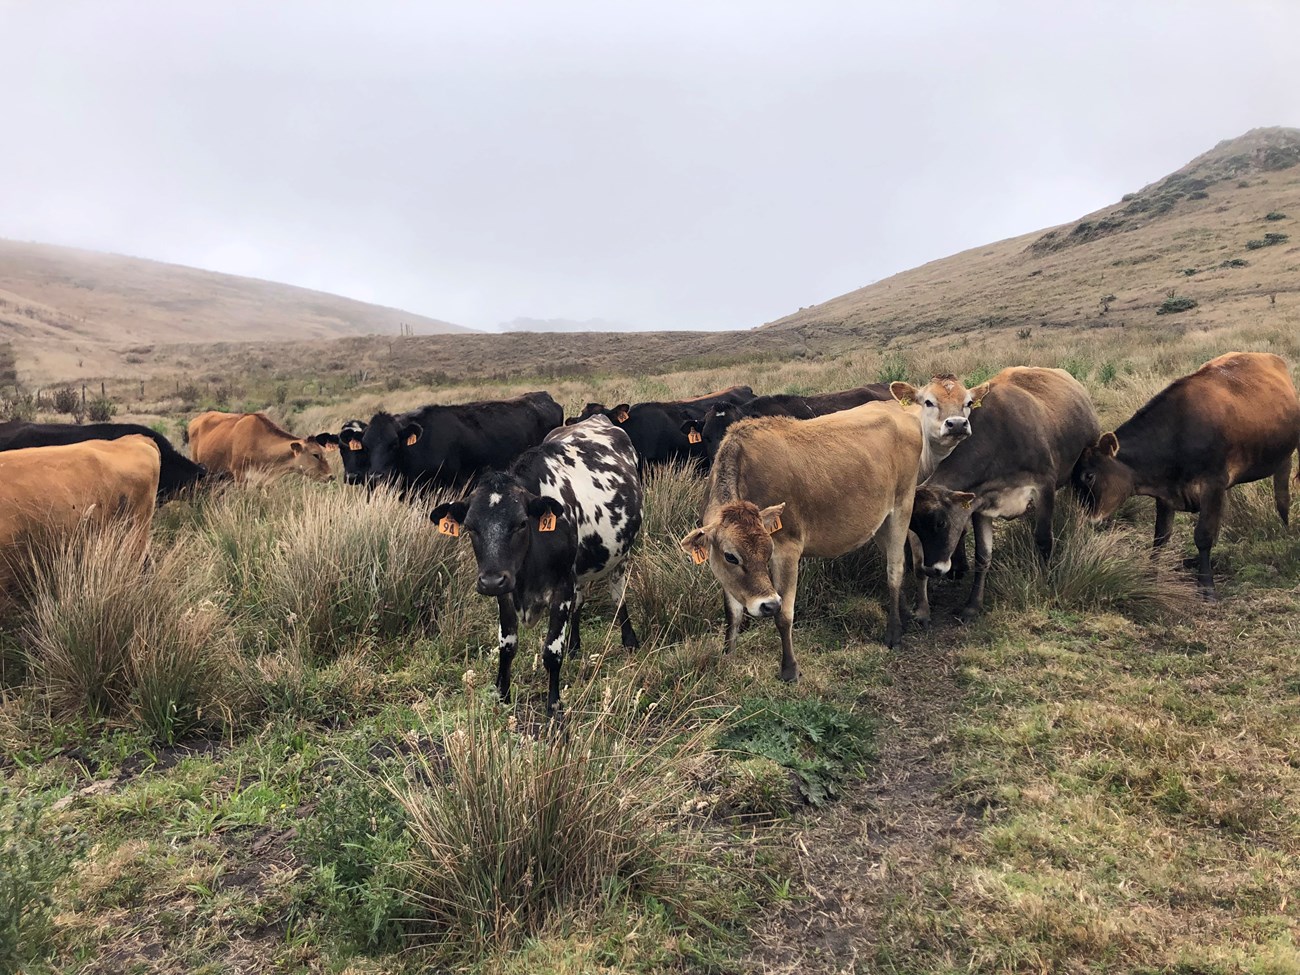 About a dozen cows in various shades of brown, black, and white, some pointing their noses curiously towards the photographer.